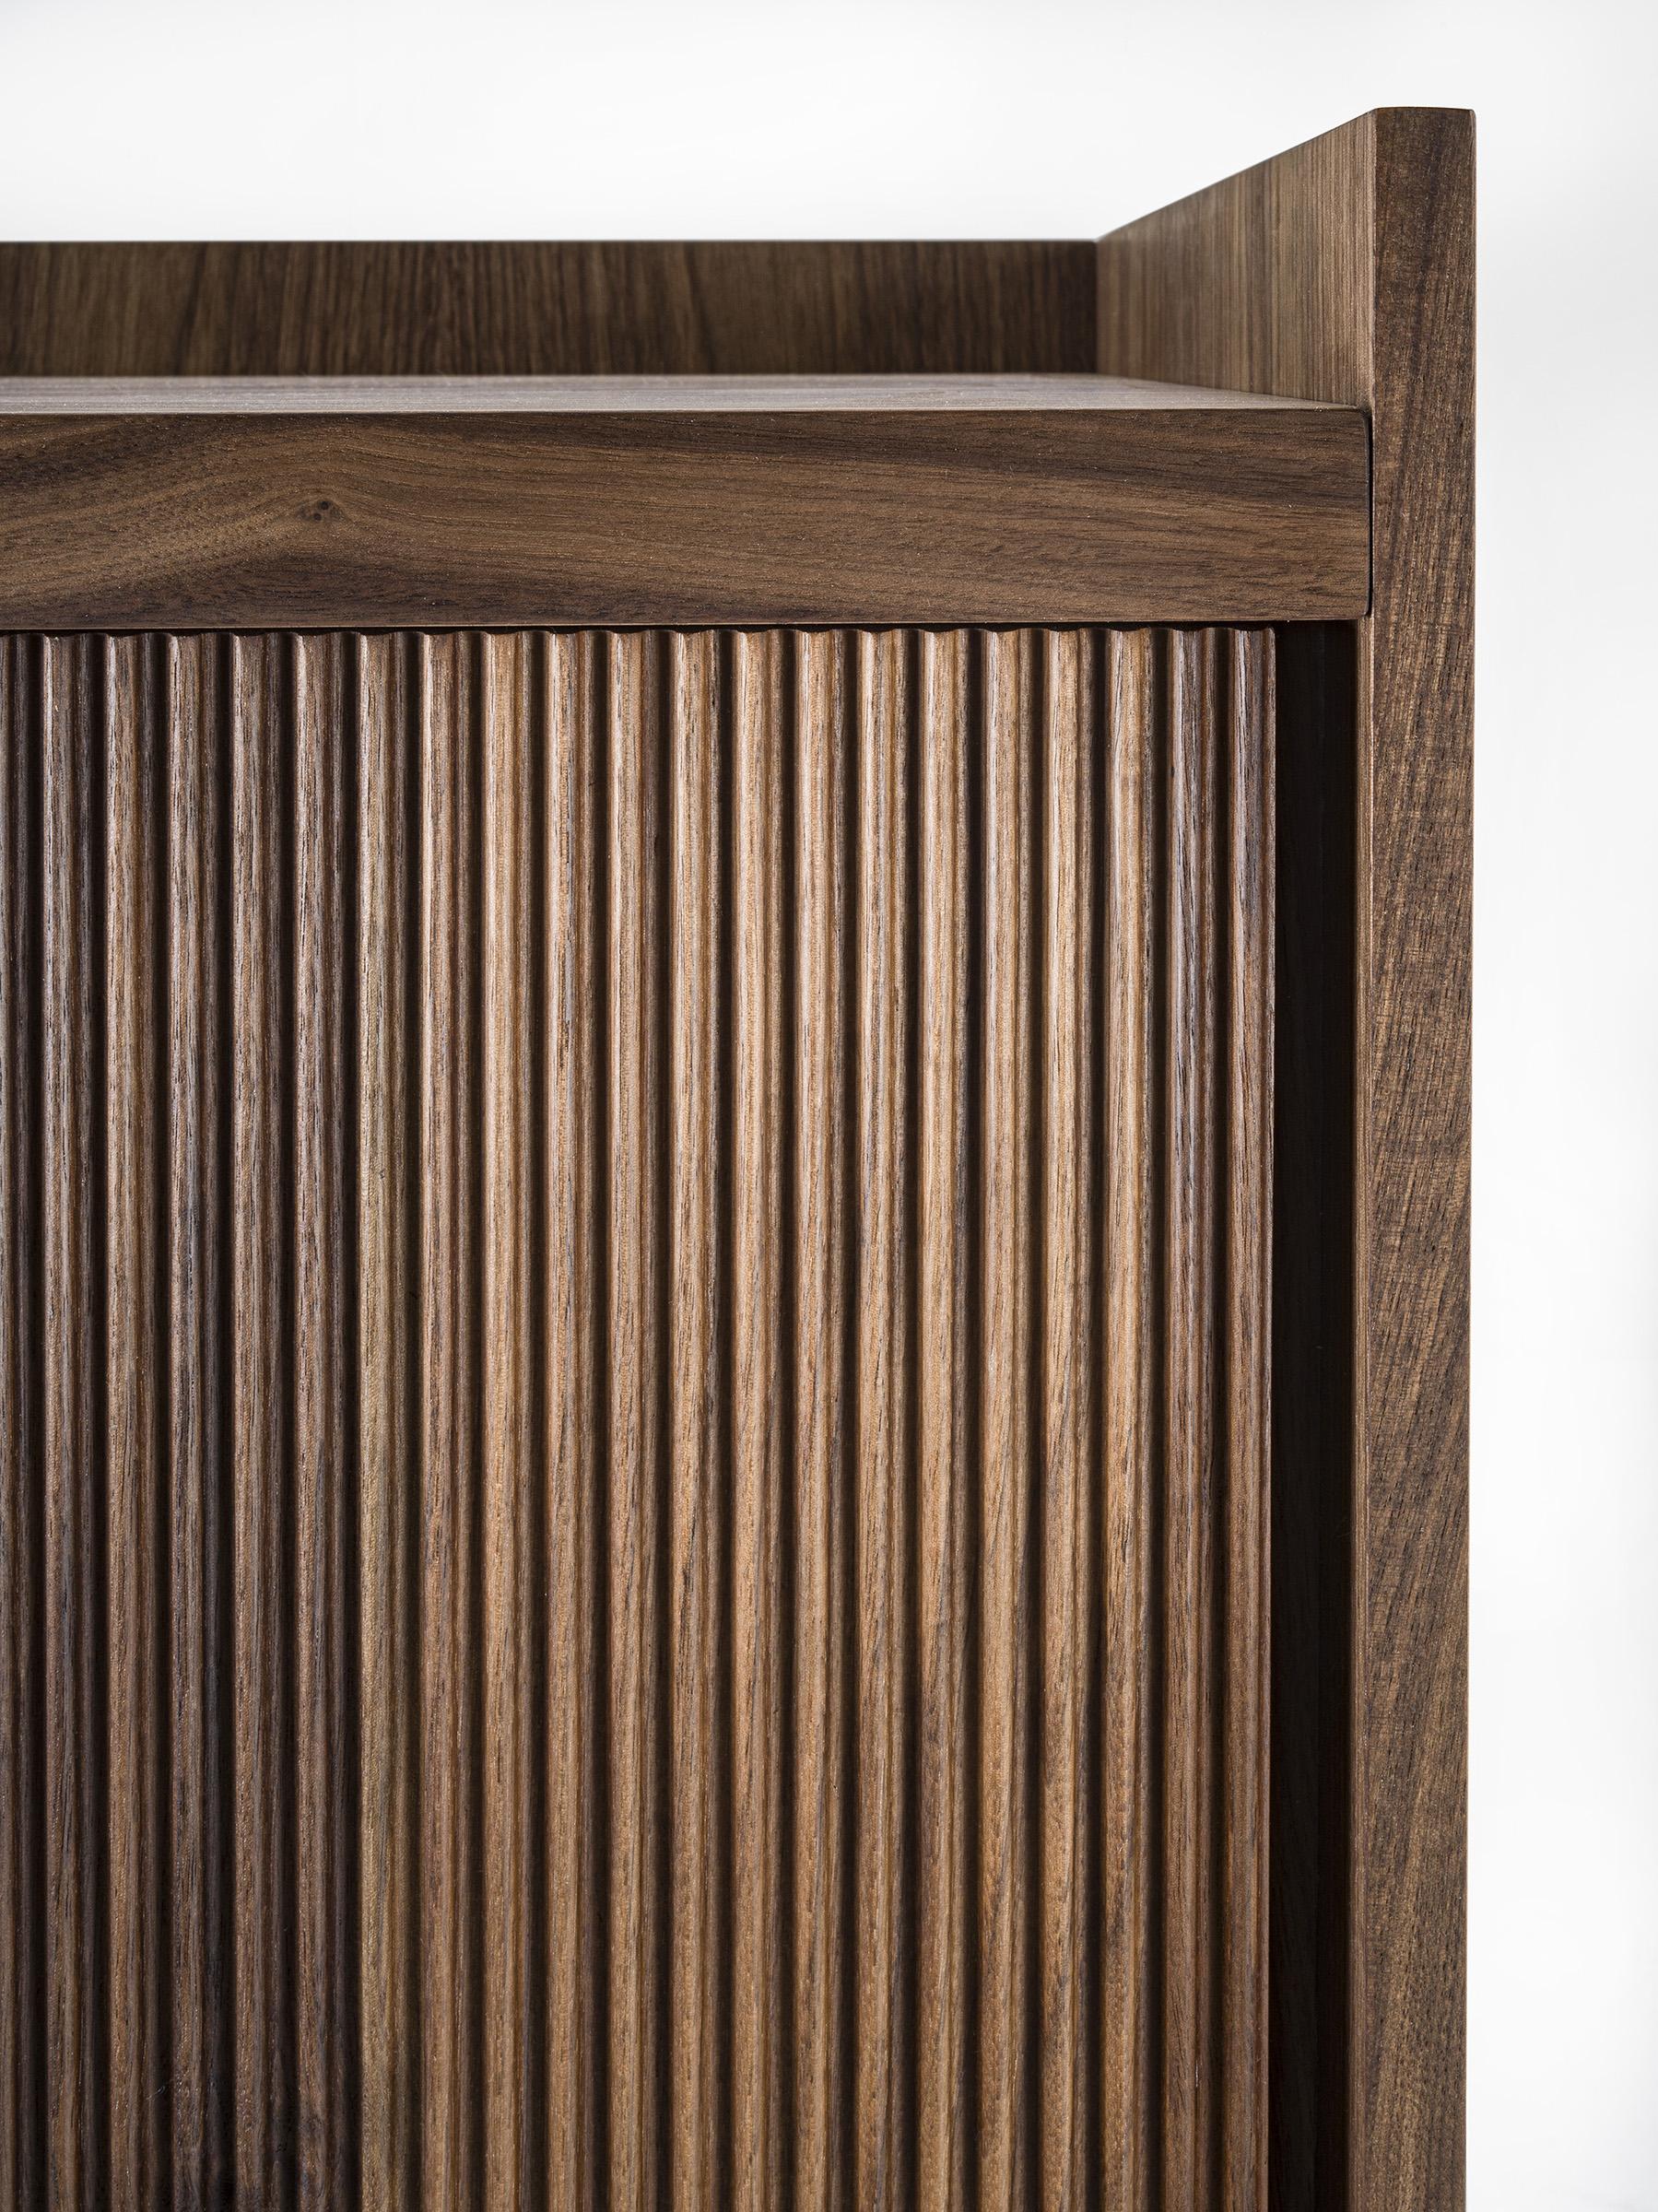 Italian Revo Wood Highboard, Designed by Giuliano & Gabriele Cappelletti, Made in Italy For Sale